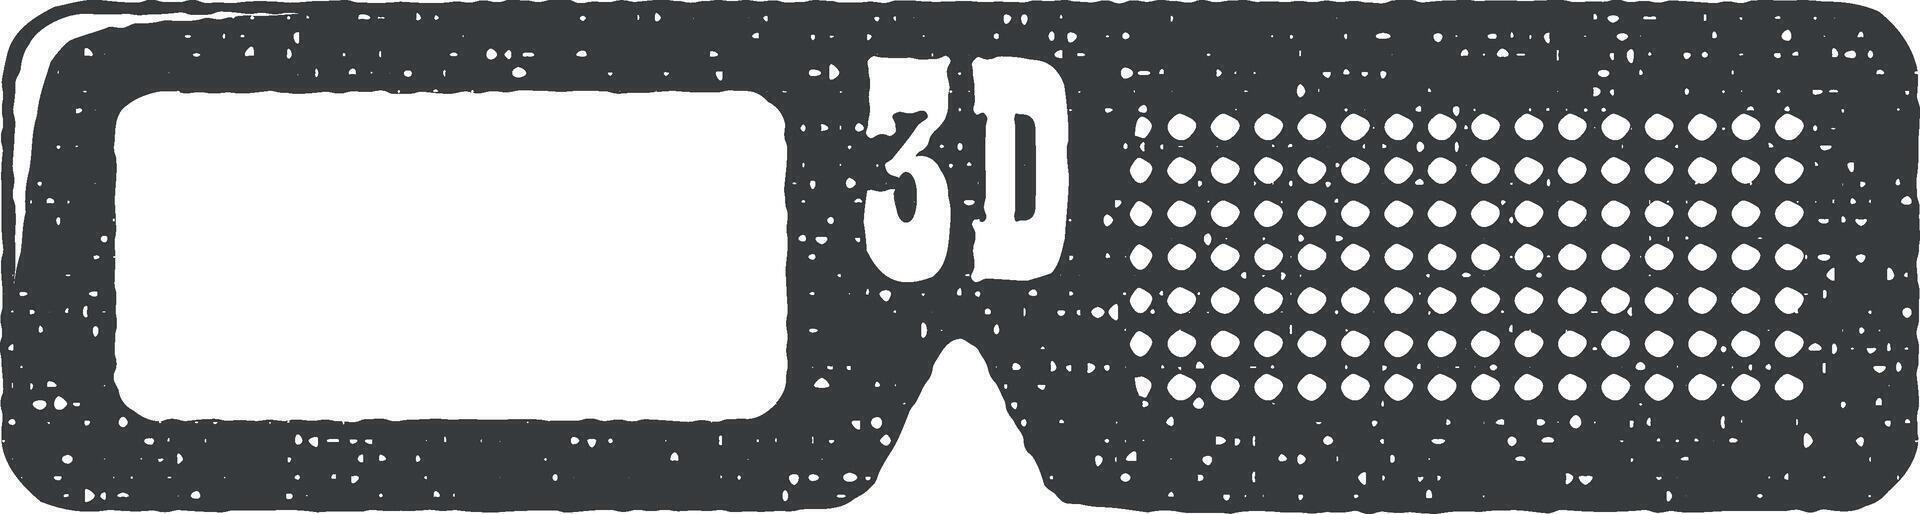 3d cinema glasses vector icon illustration with stamp effect